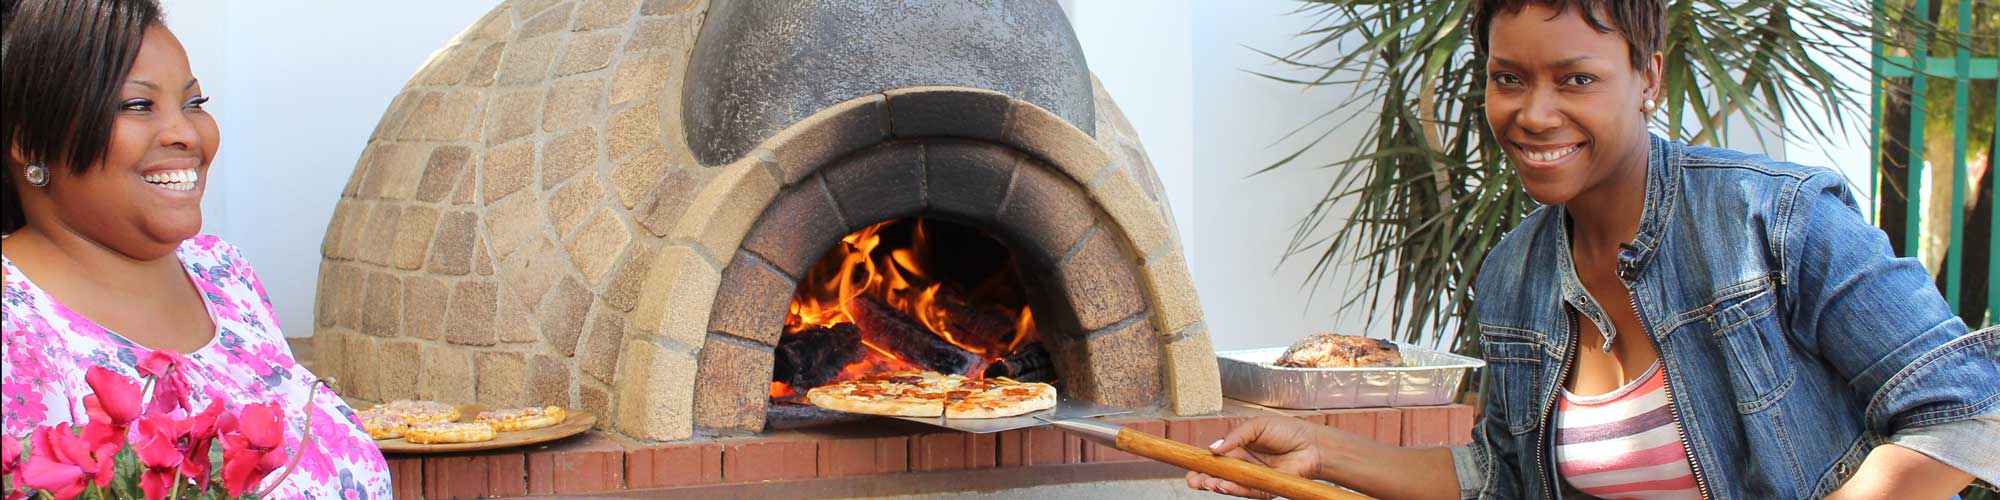 Home Pizza Ovens